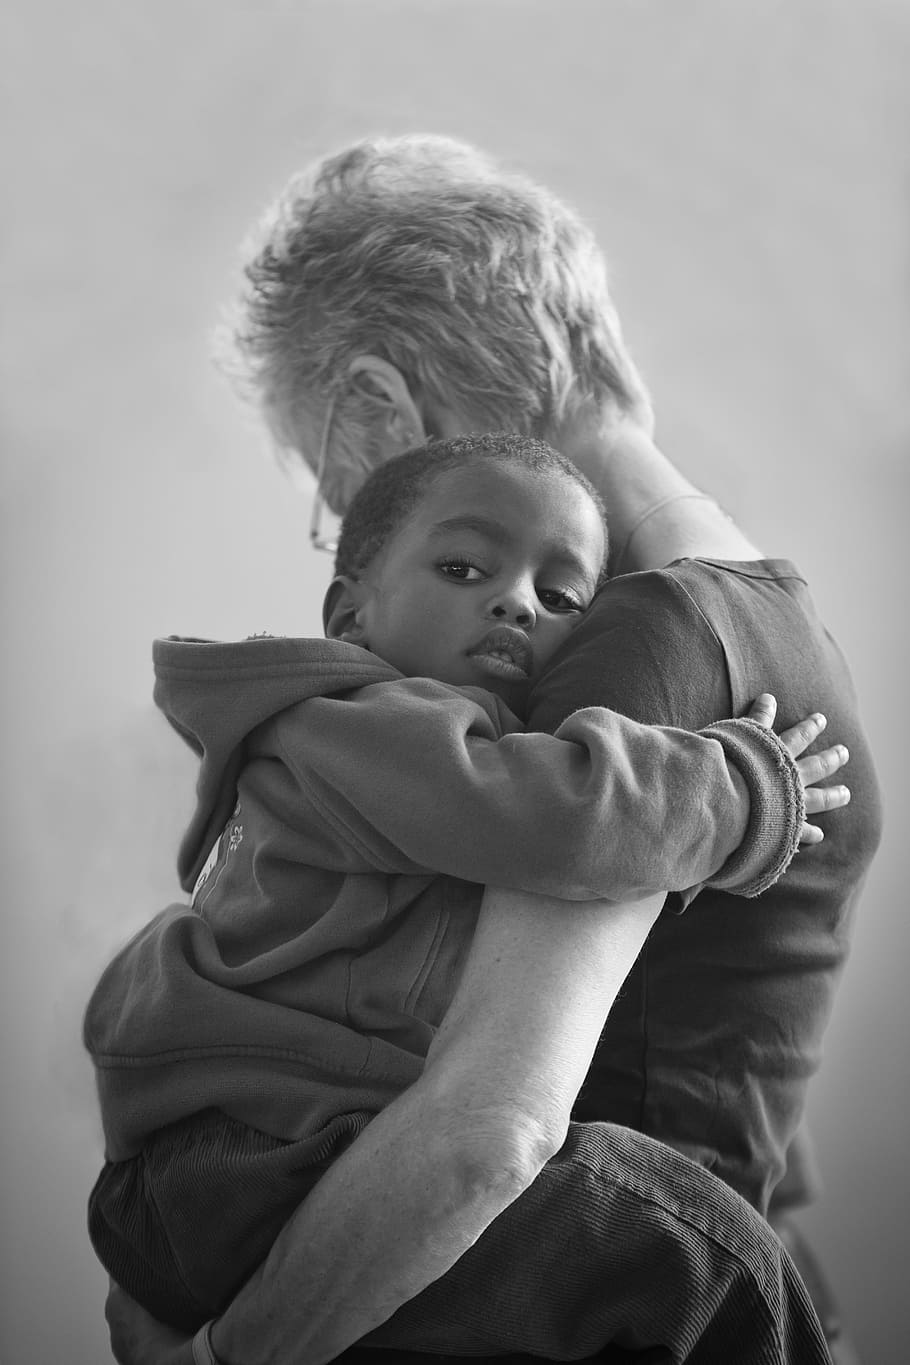 boy hugging woman, love, africa, orphan, child, humanitarian, cuddle, family, mother, tenderness